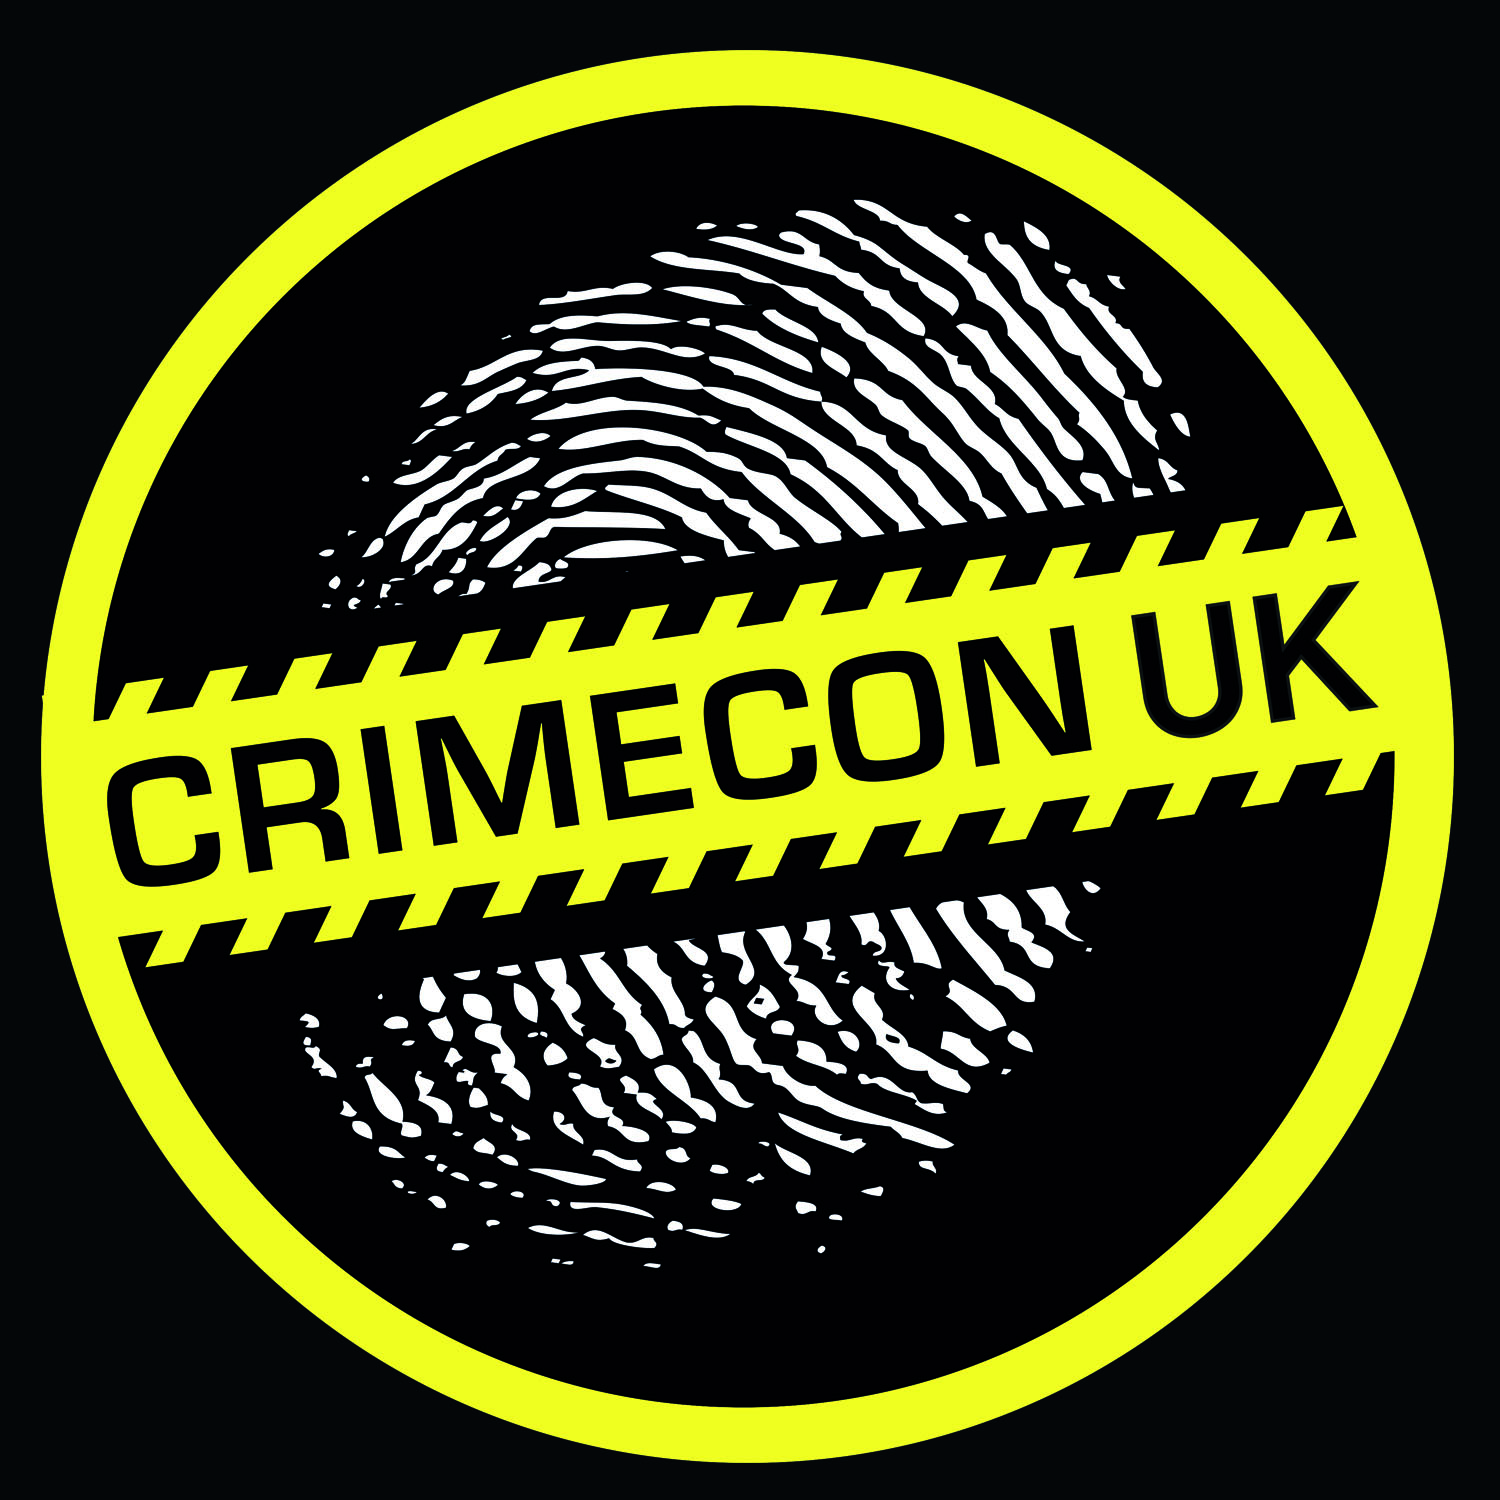 The Assembly Events hosts CrimeCon UK in London.